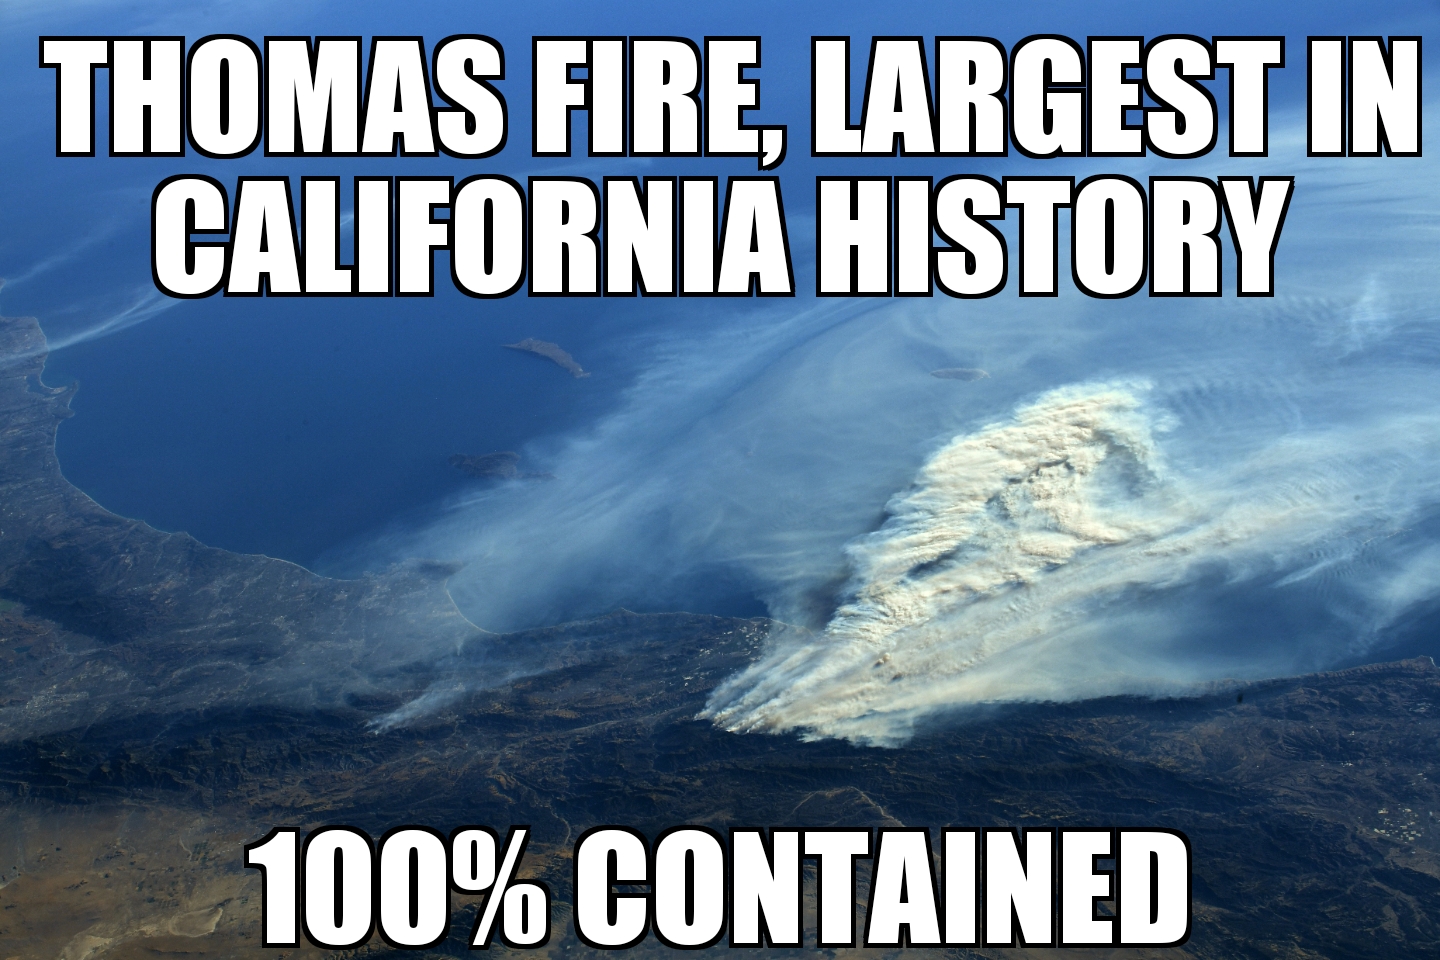 Thomas Fire 100% contained